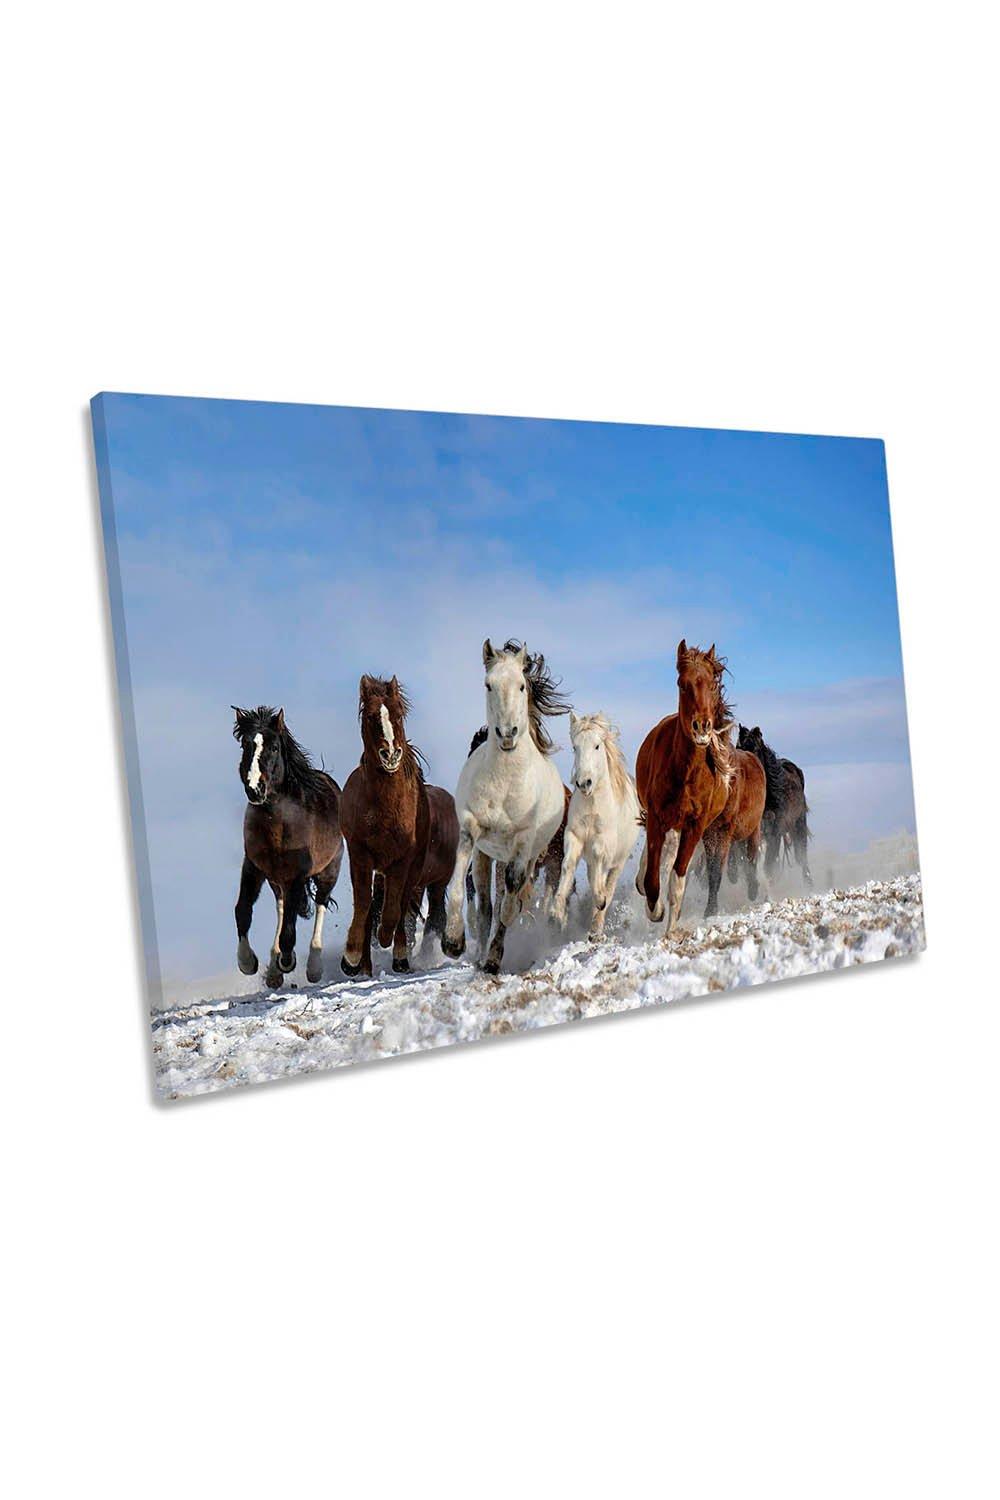 Mongolia Horses Gallop Canvas Wall Art Picture Print